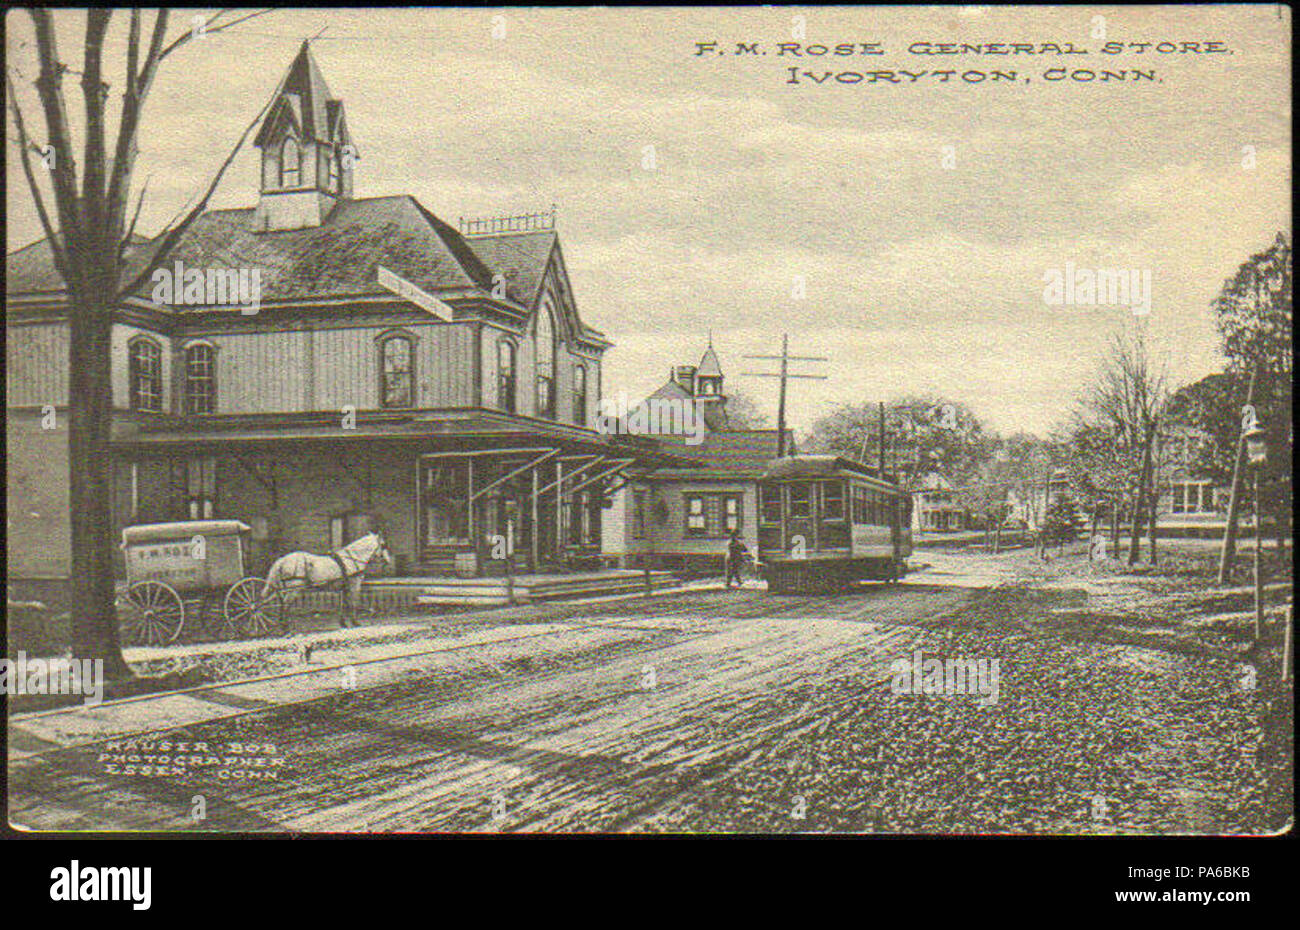 635 F.M. Rose General Store and trolley, Ivoryton postcard Stock Photo